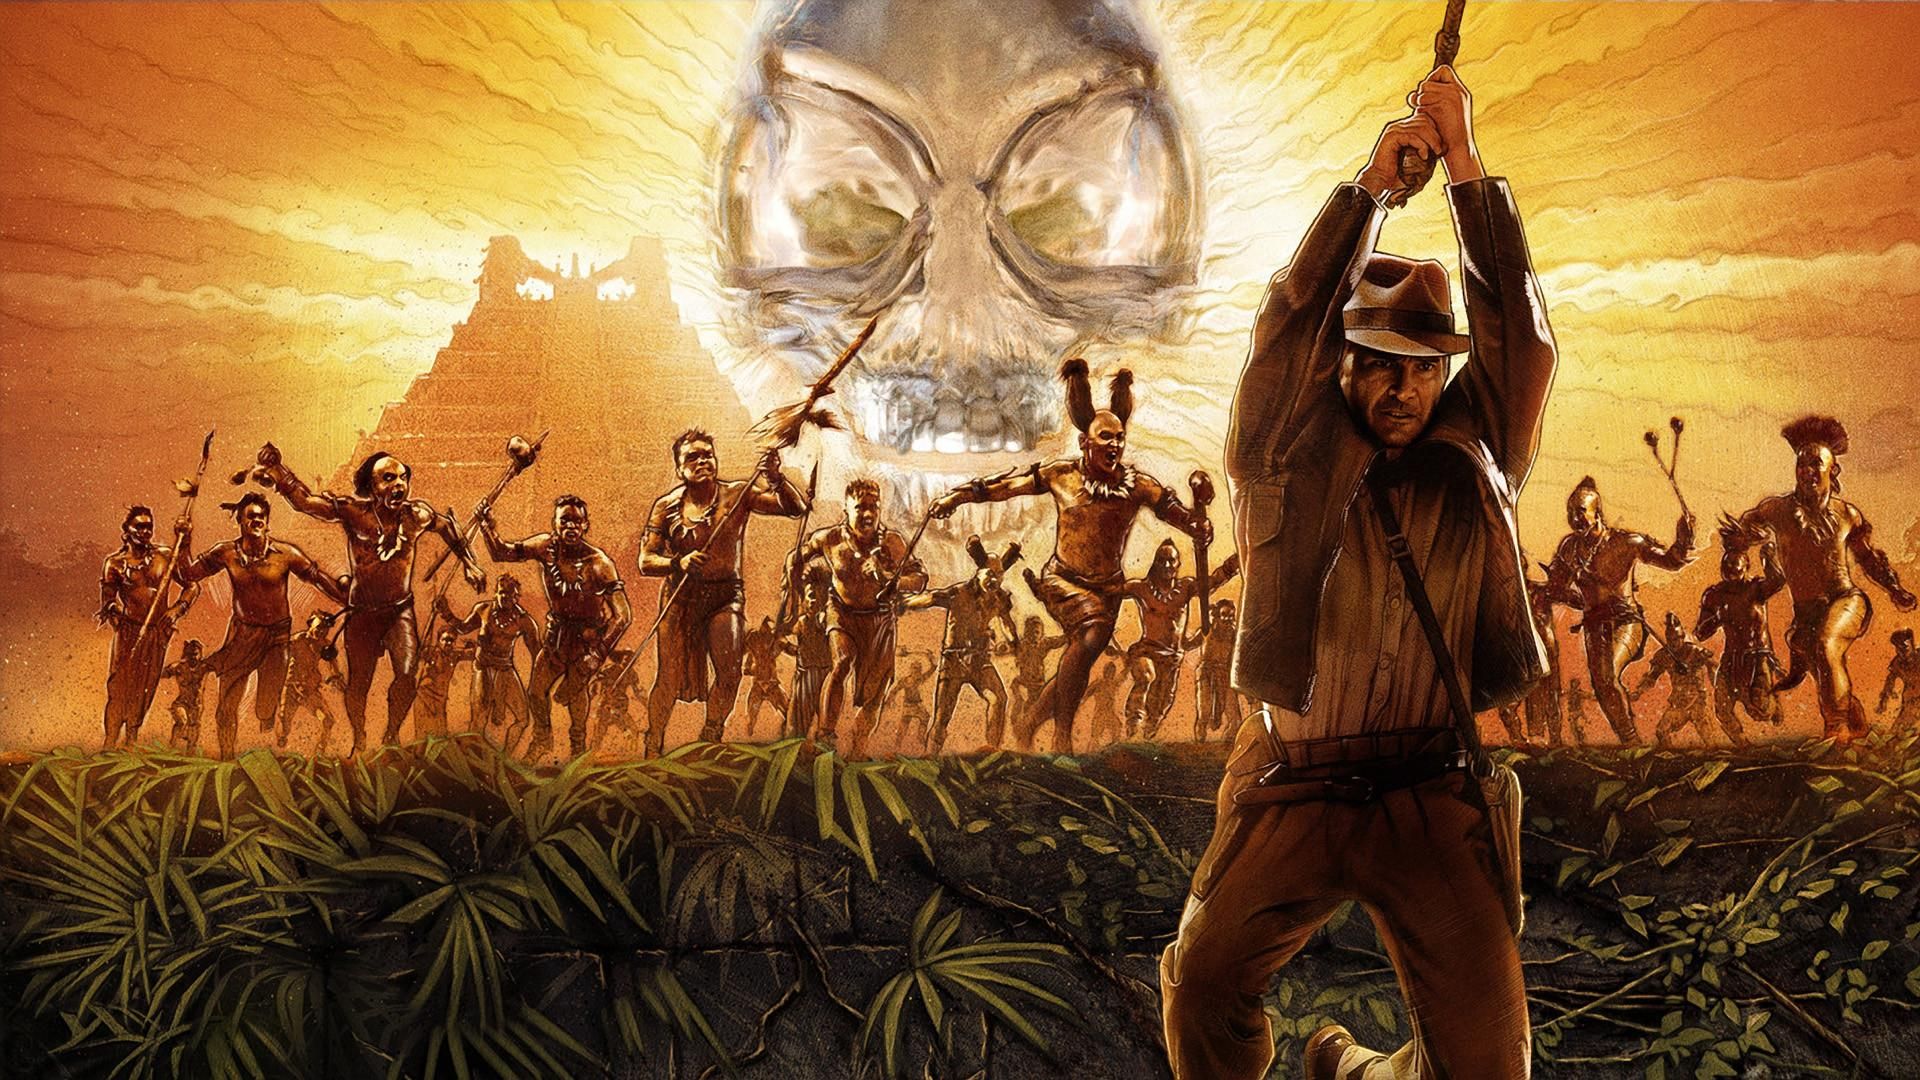 Indiana Jones and the Kingdom of the Crystal Skull background